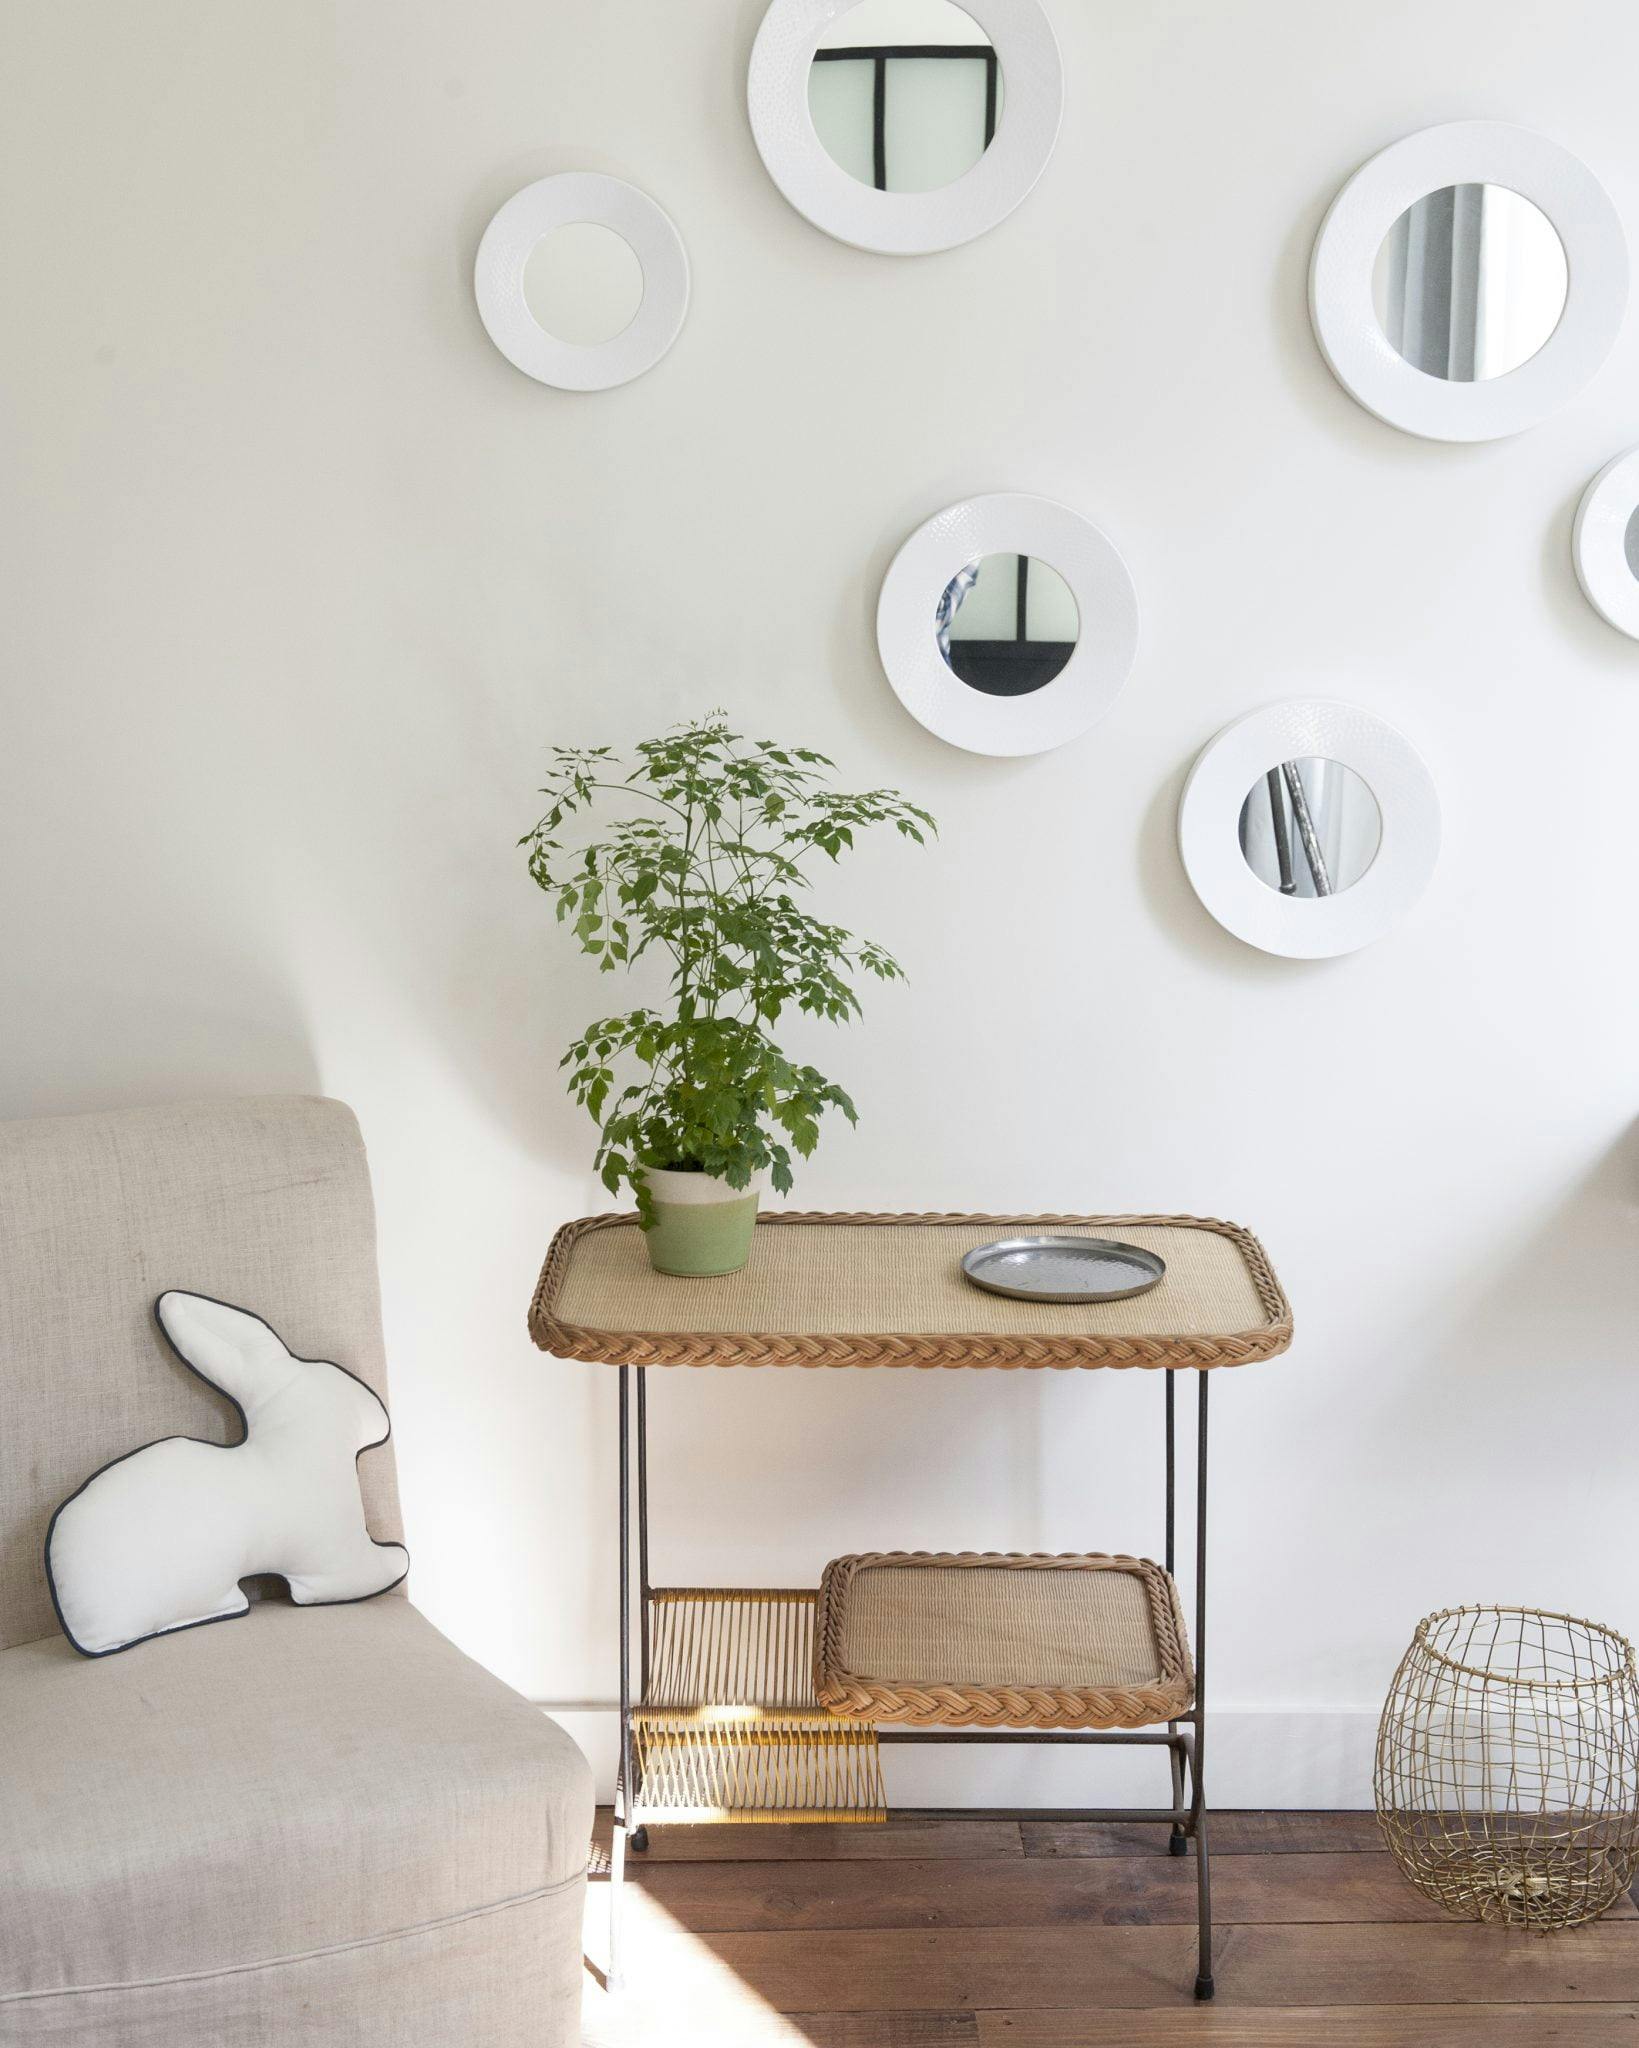 Detail of a wooden table, mirrors on a white wall.